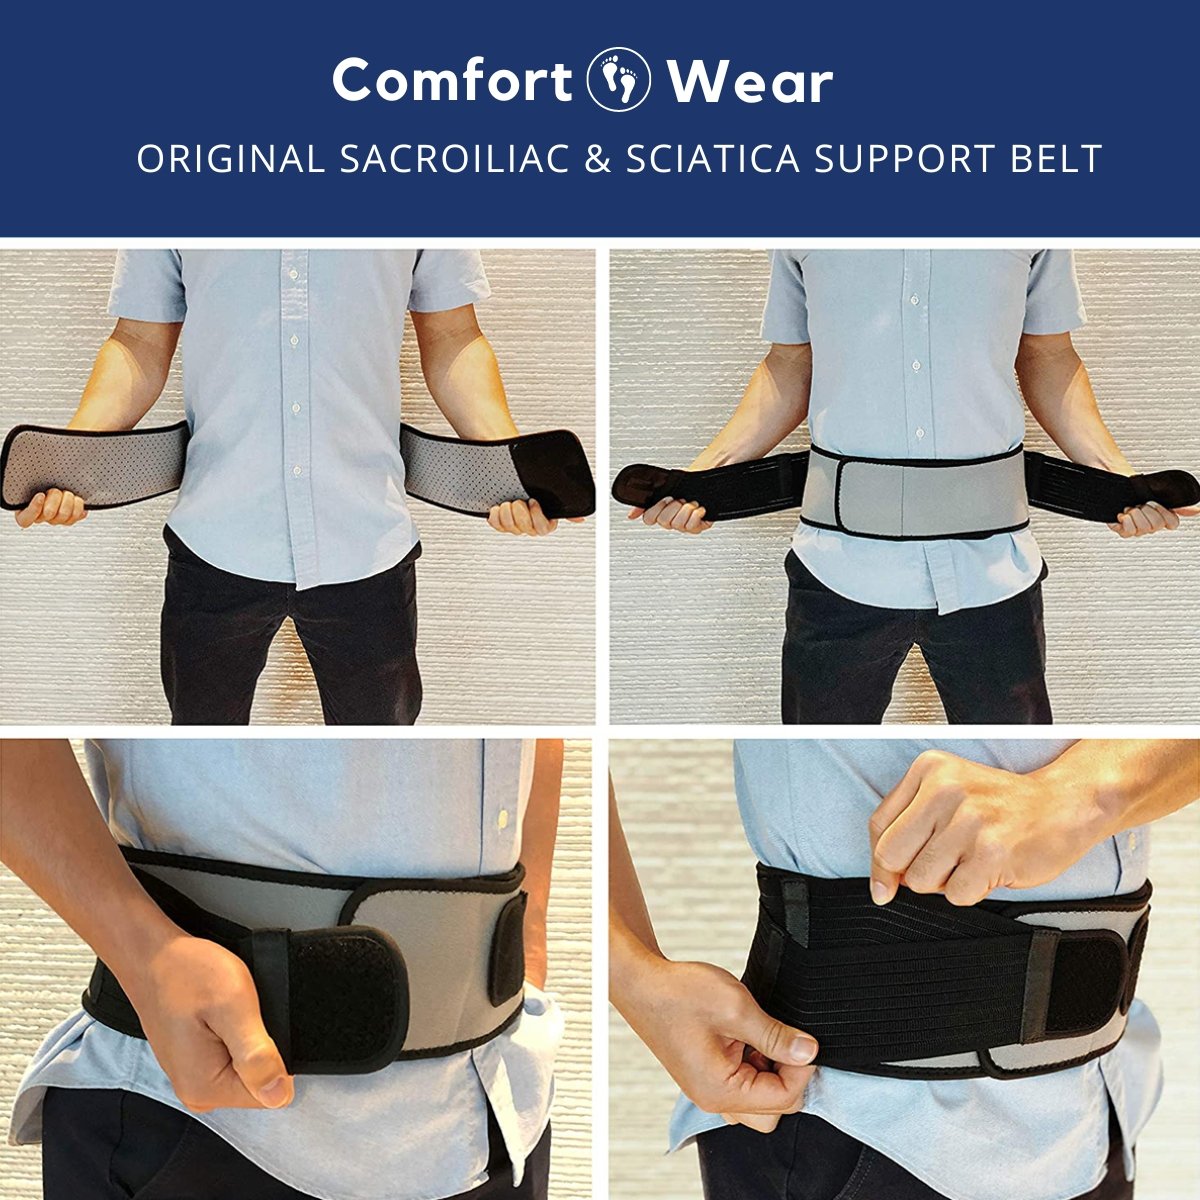 How to Wear a Lower Back Support Belt - Physioroom Blog